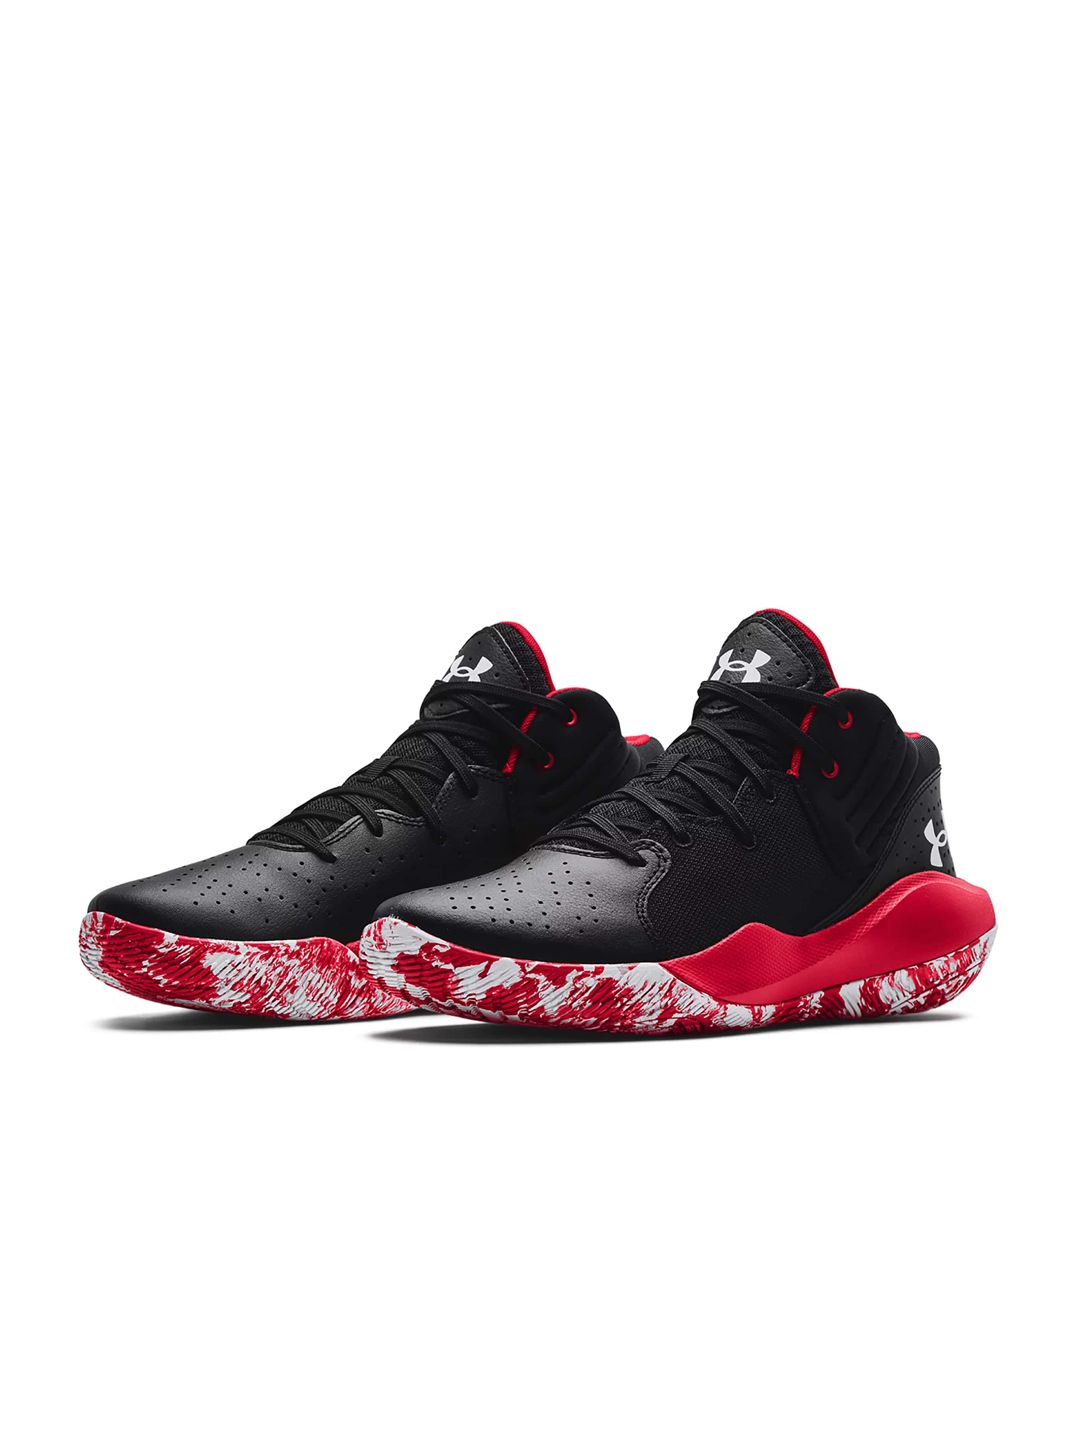 UNDER ARMOUR Unisex Perforated Detail Jet '21 Basketball Shoes Price in India